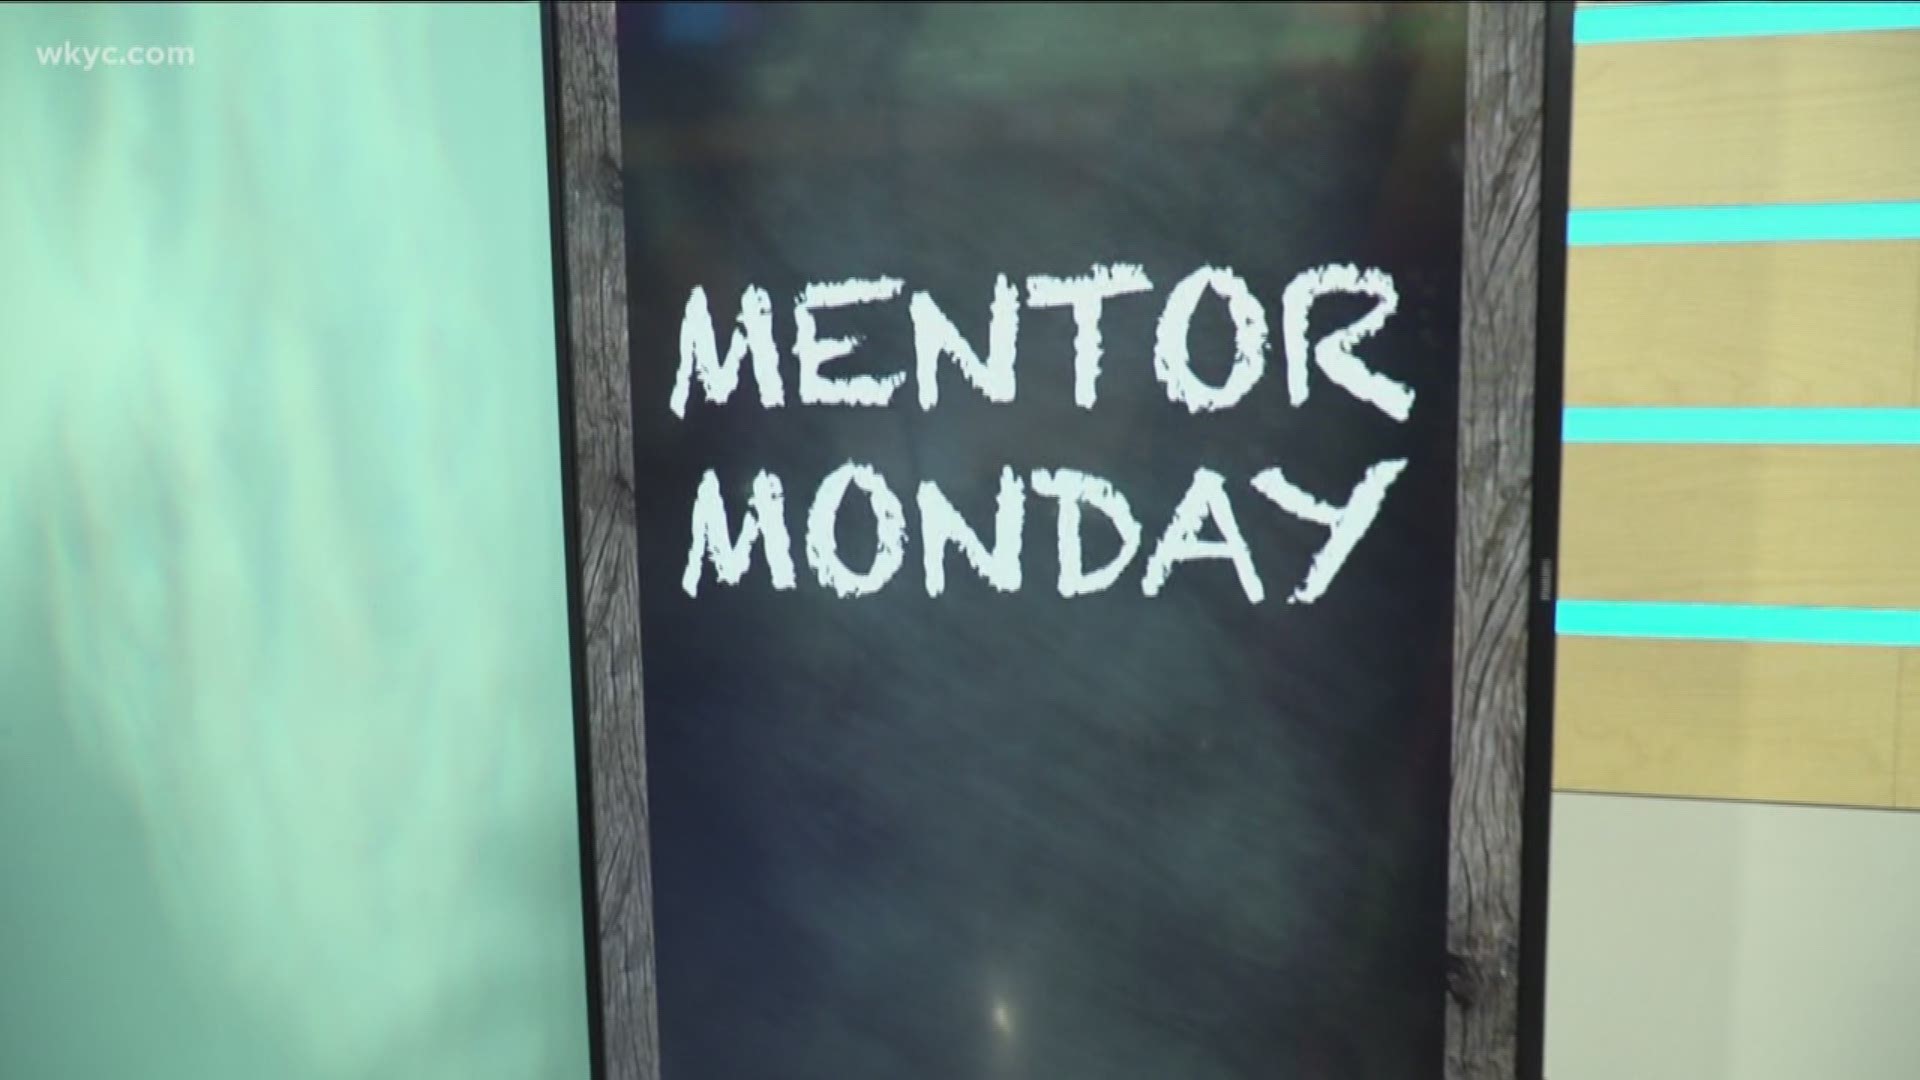 As a freshman, it’s tough to navigate college, especially since you are on your own for the first time. That’s why College Now of Greater Cleveland needs mentors.